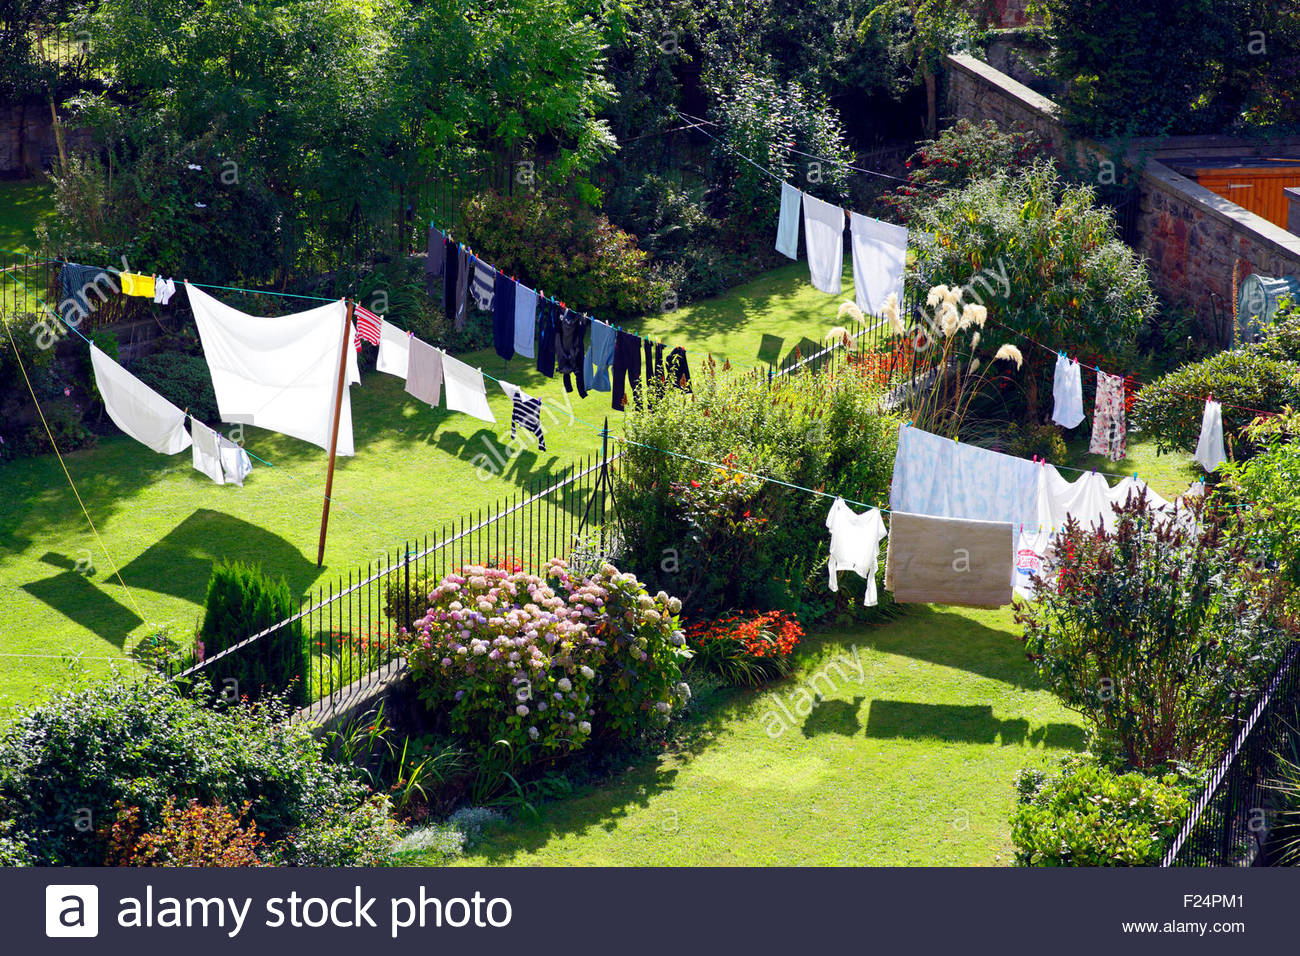 Washing line clothes drying in suburban back gardens Stock Photo - Alamy